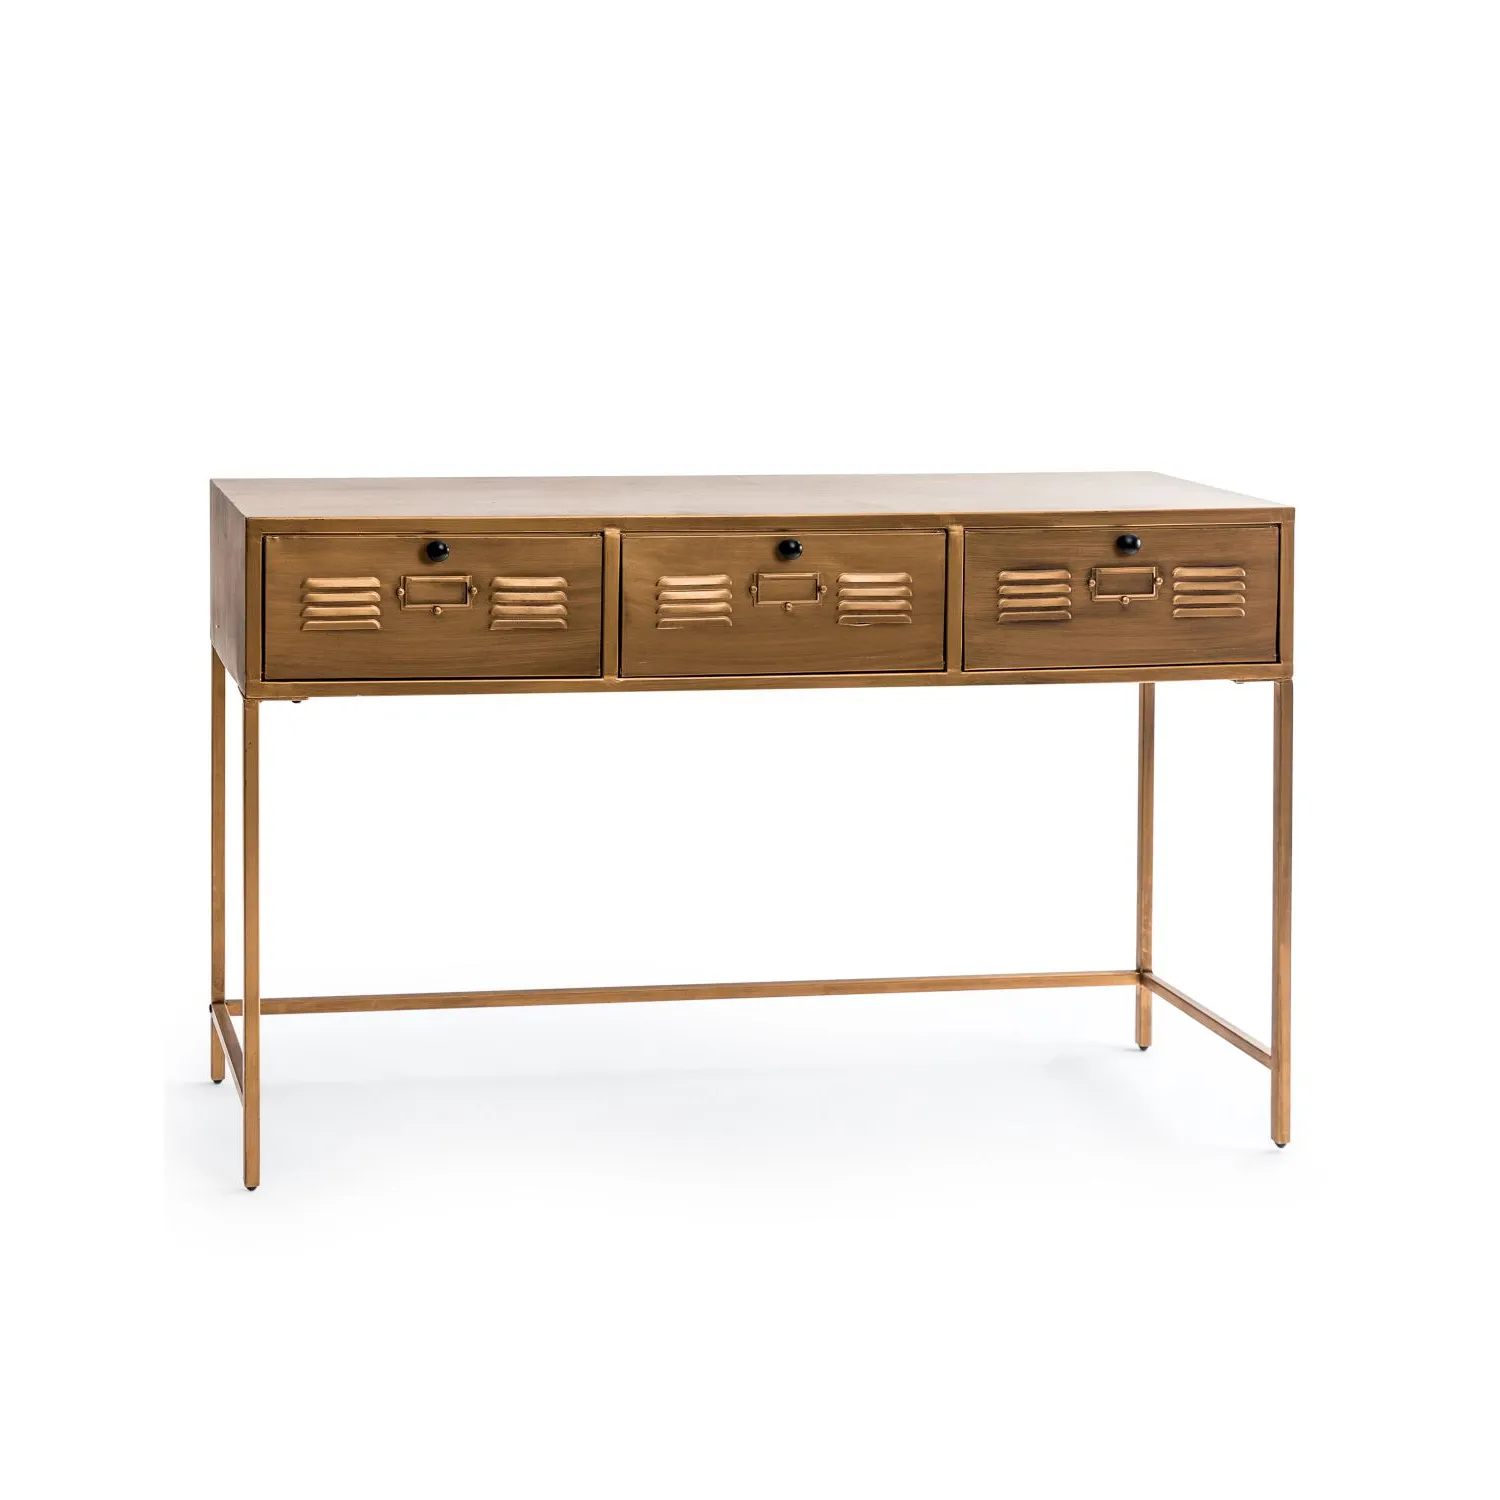 Brushed Antique Gold Metal 3 Drawer Console Table